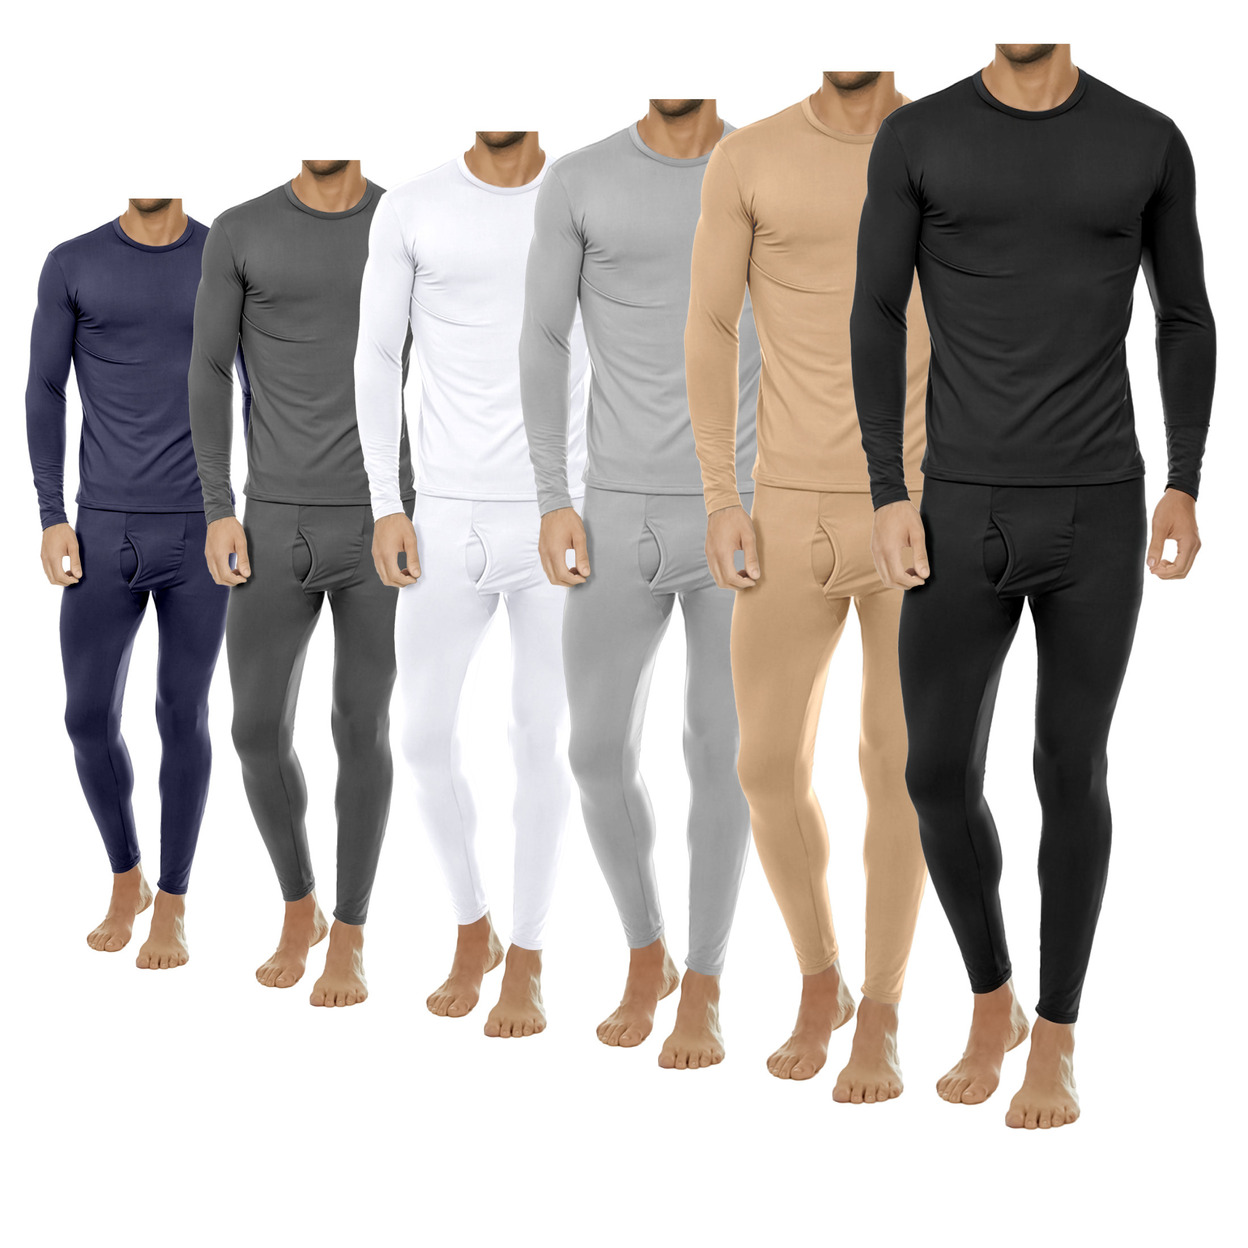 2-Sets: Men's Winter Warm Fleece Lined Thermal Underwear Set For Cold Weather - White&navy, Medium